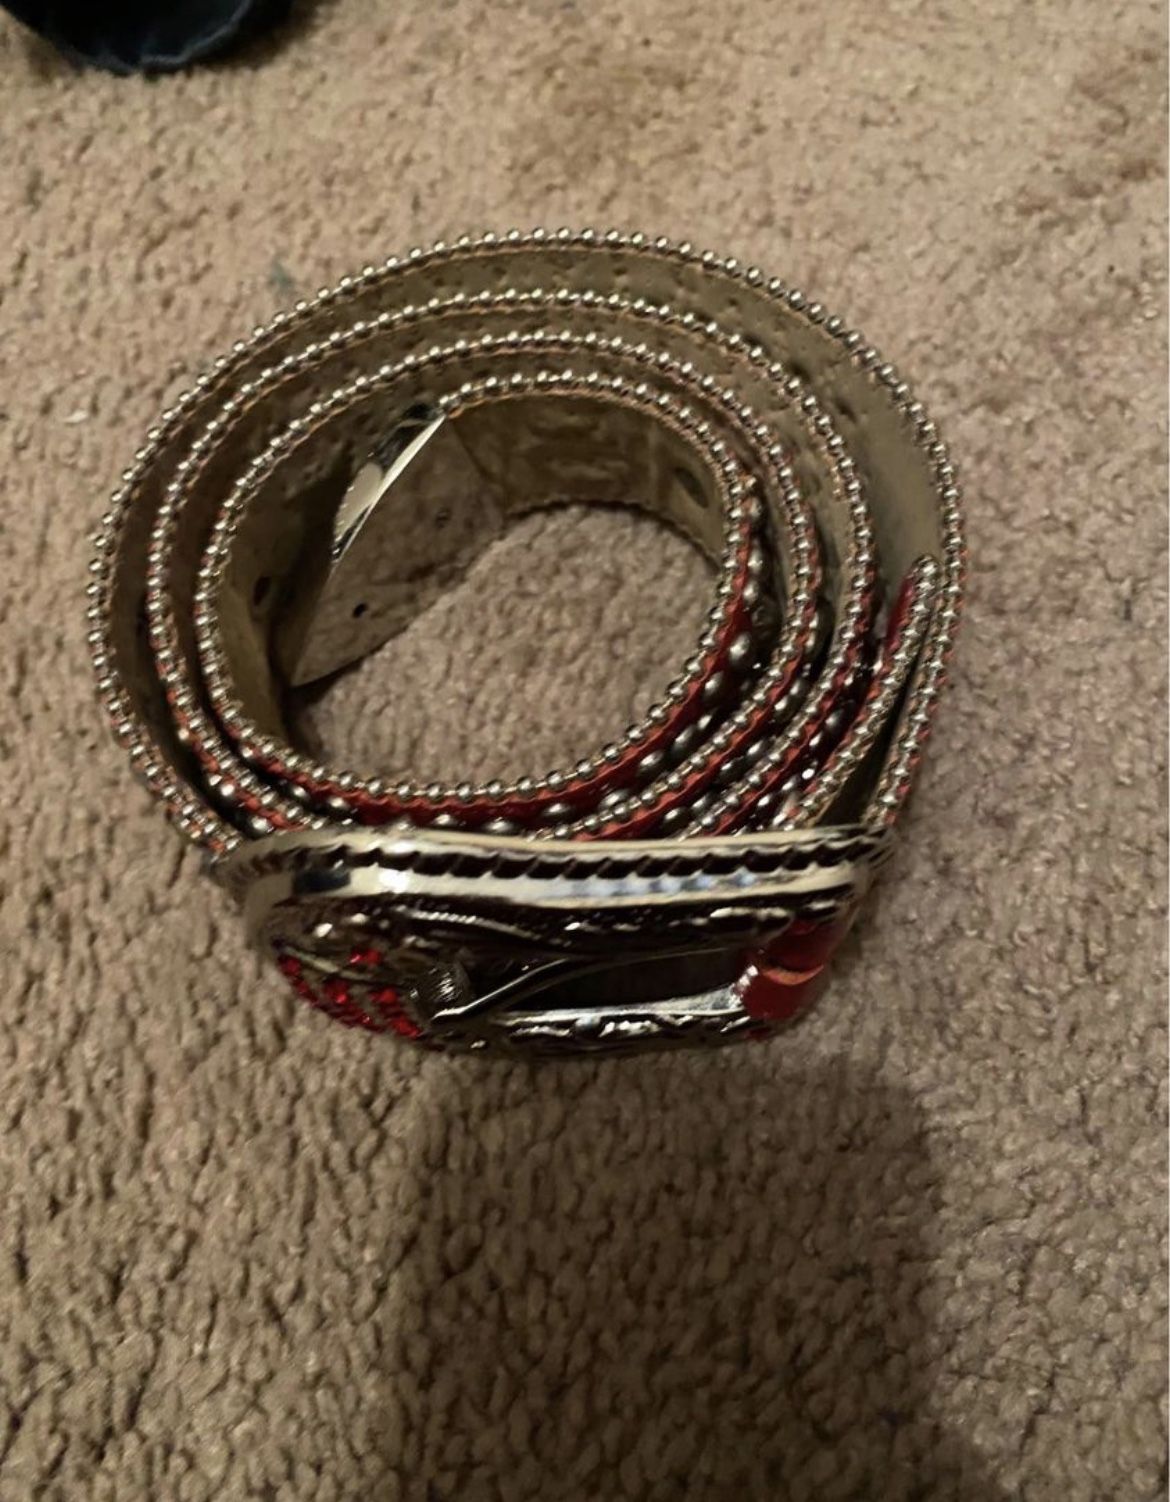 Red bb simon belt size 38 for Sale in Plant City, FL - OfferUp